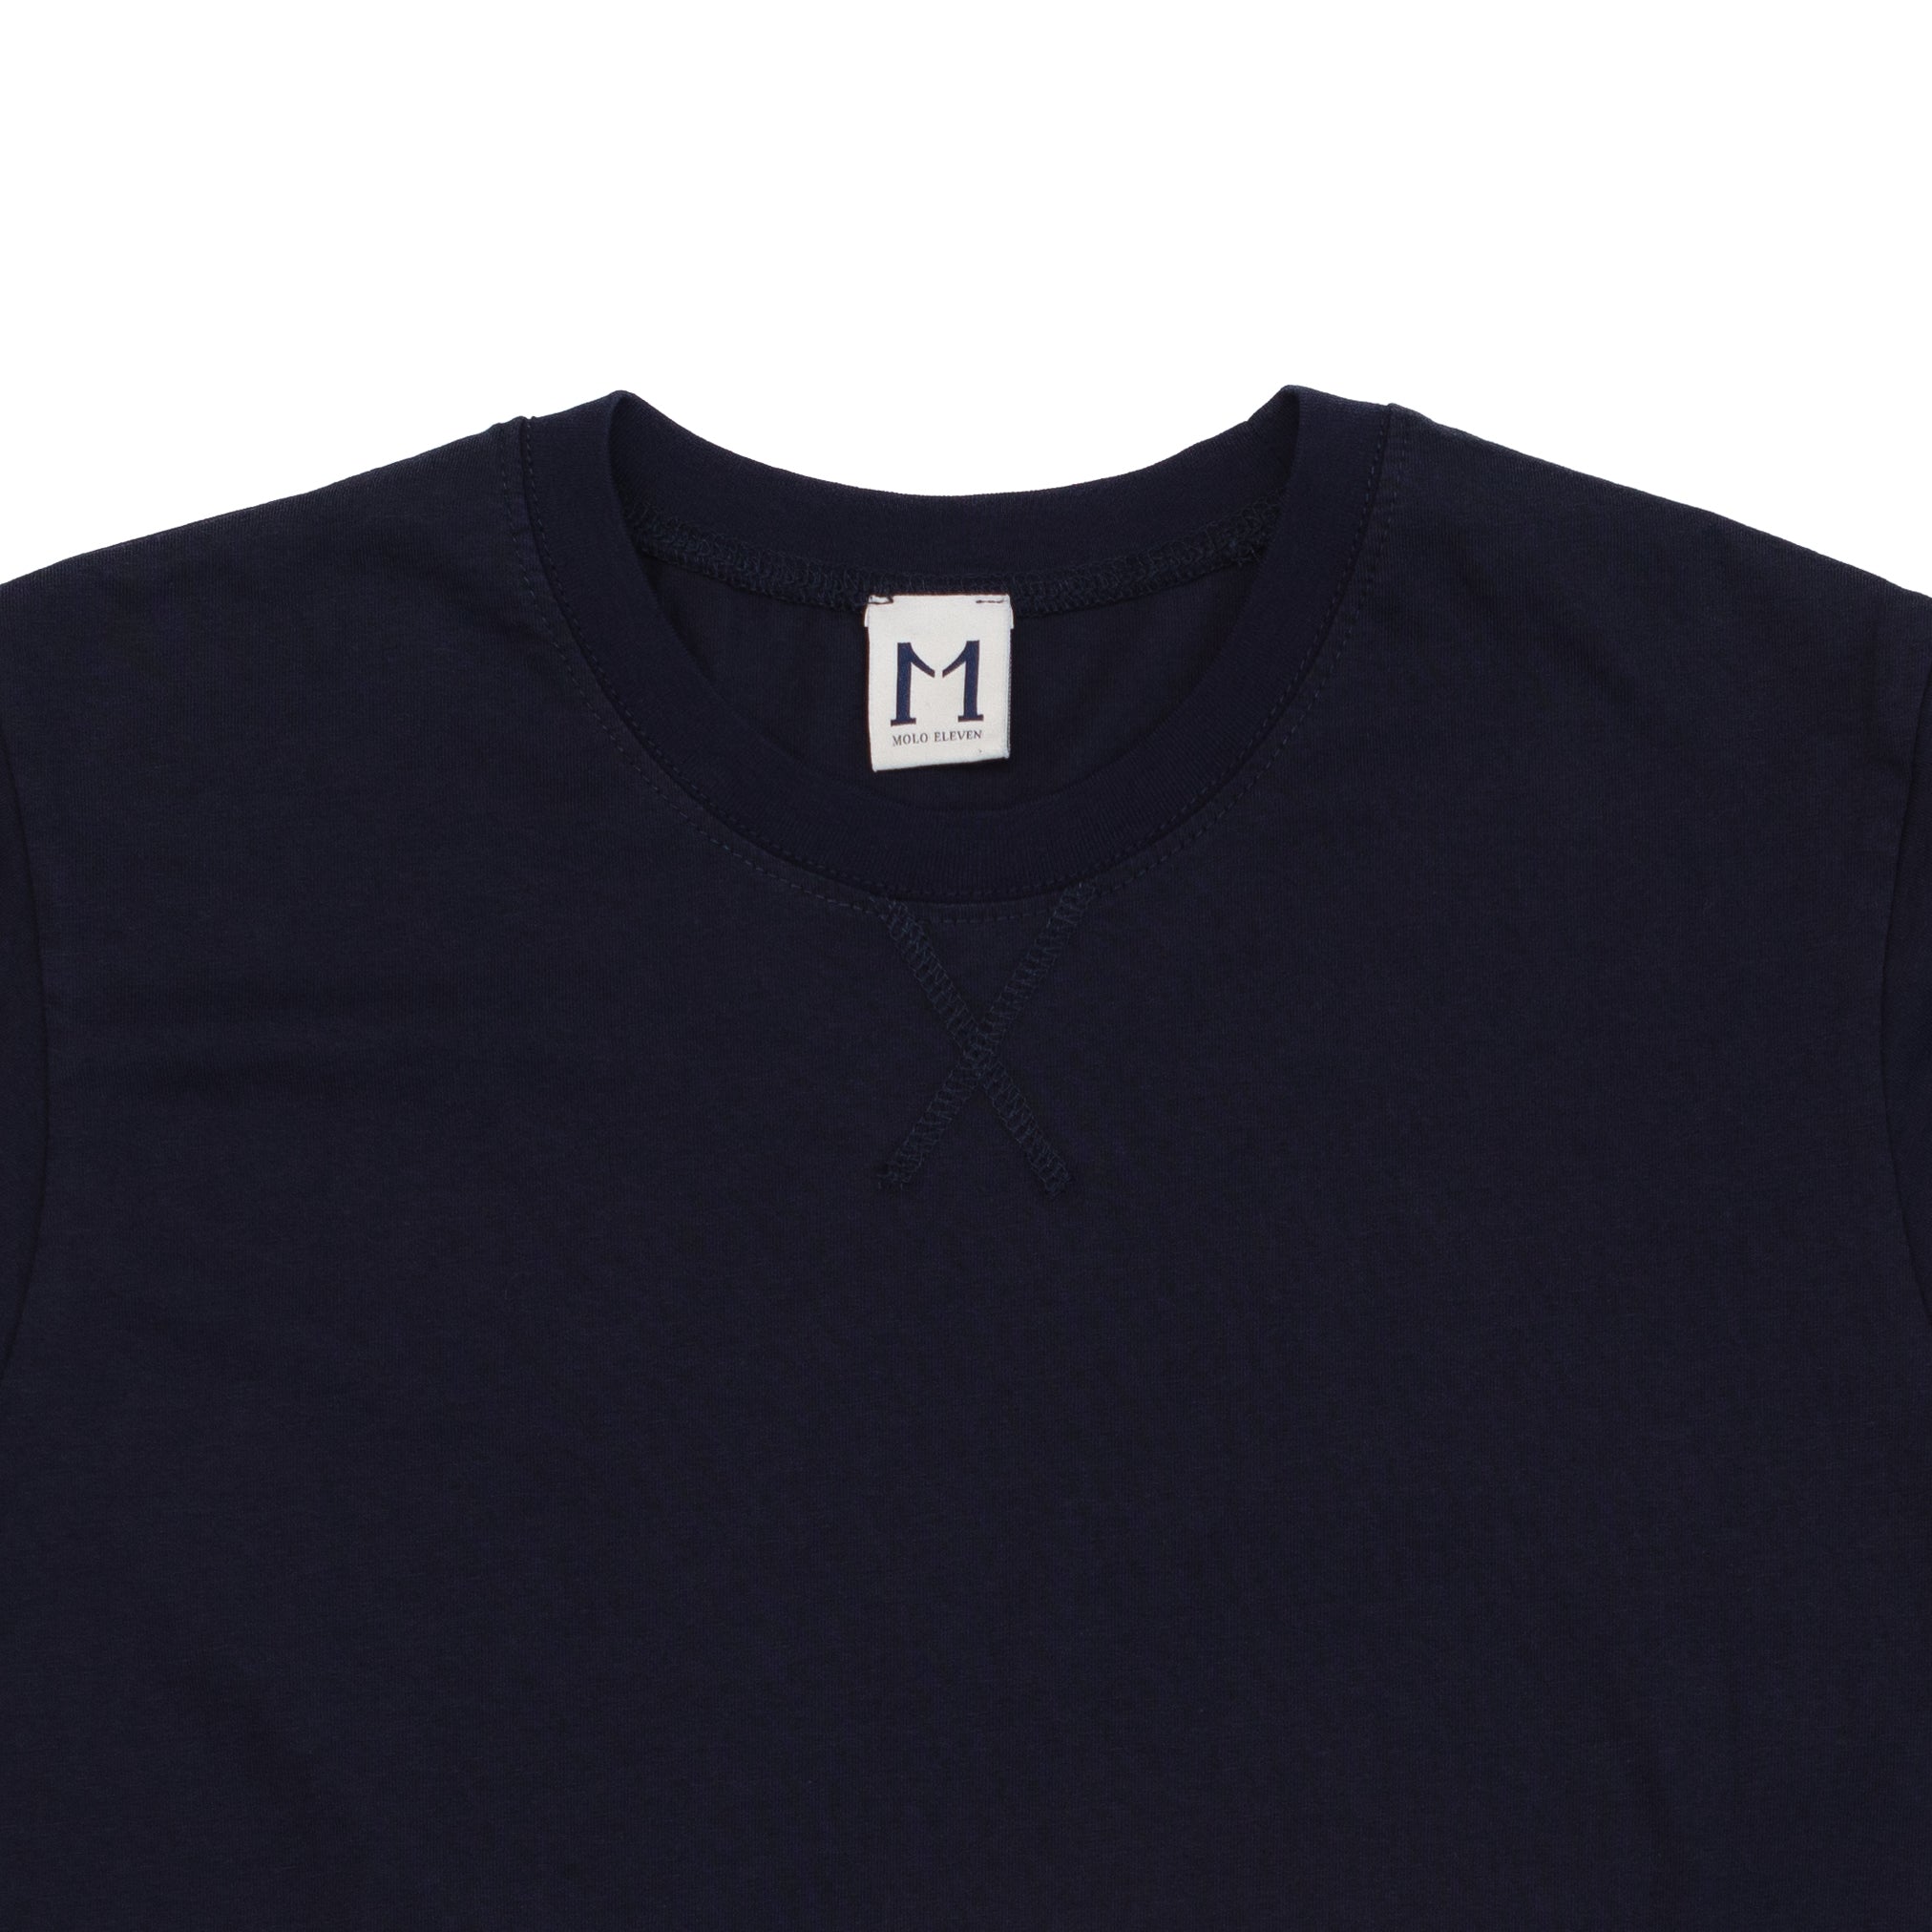 The Grant T-Shirt in Navy